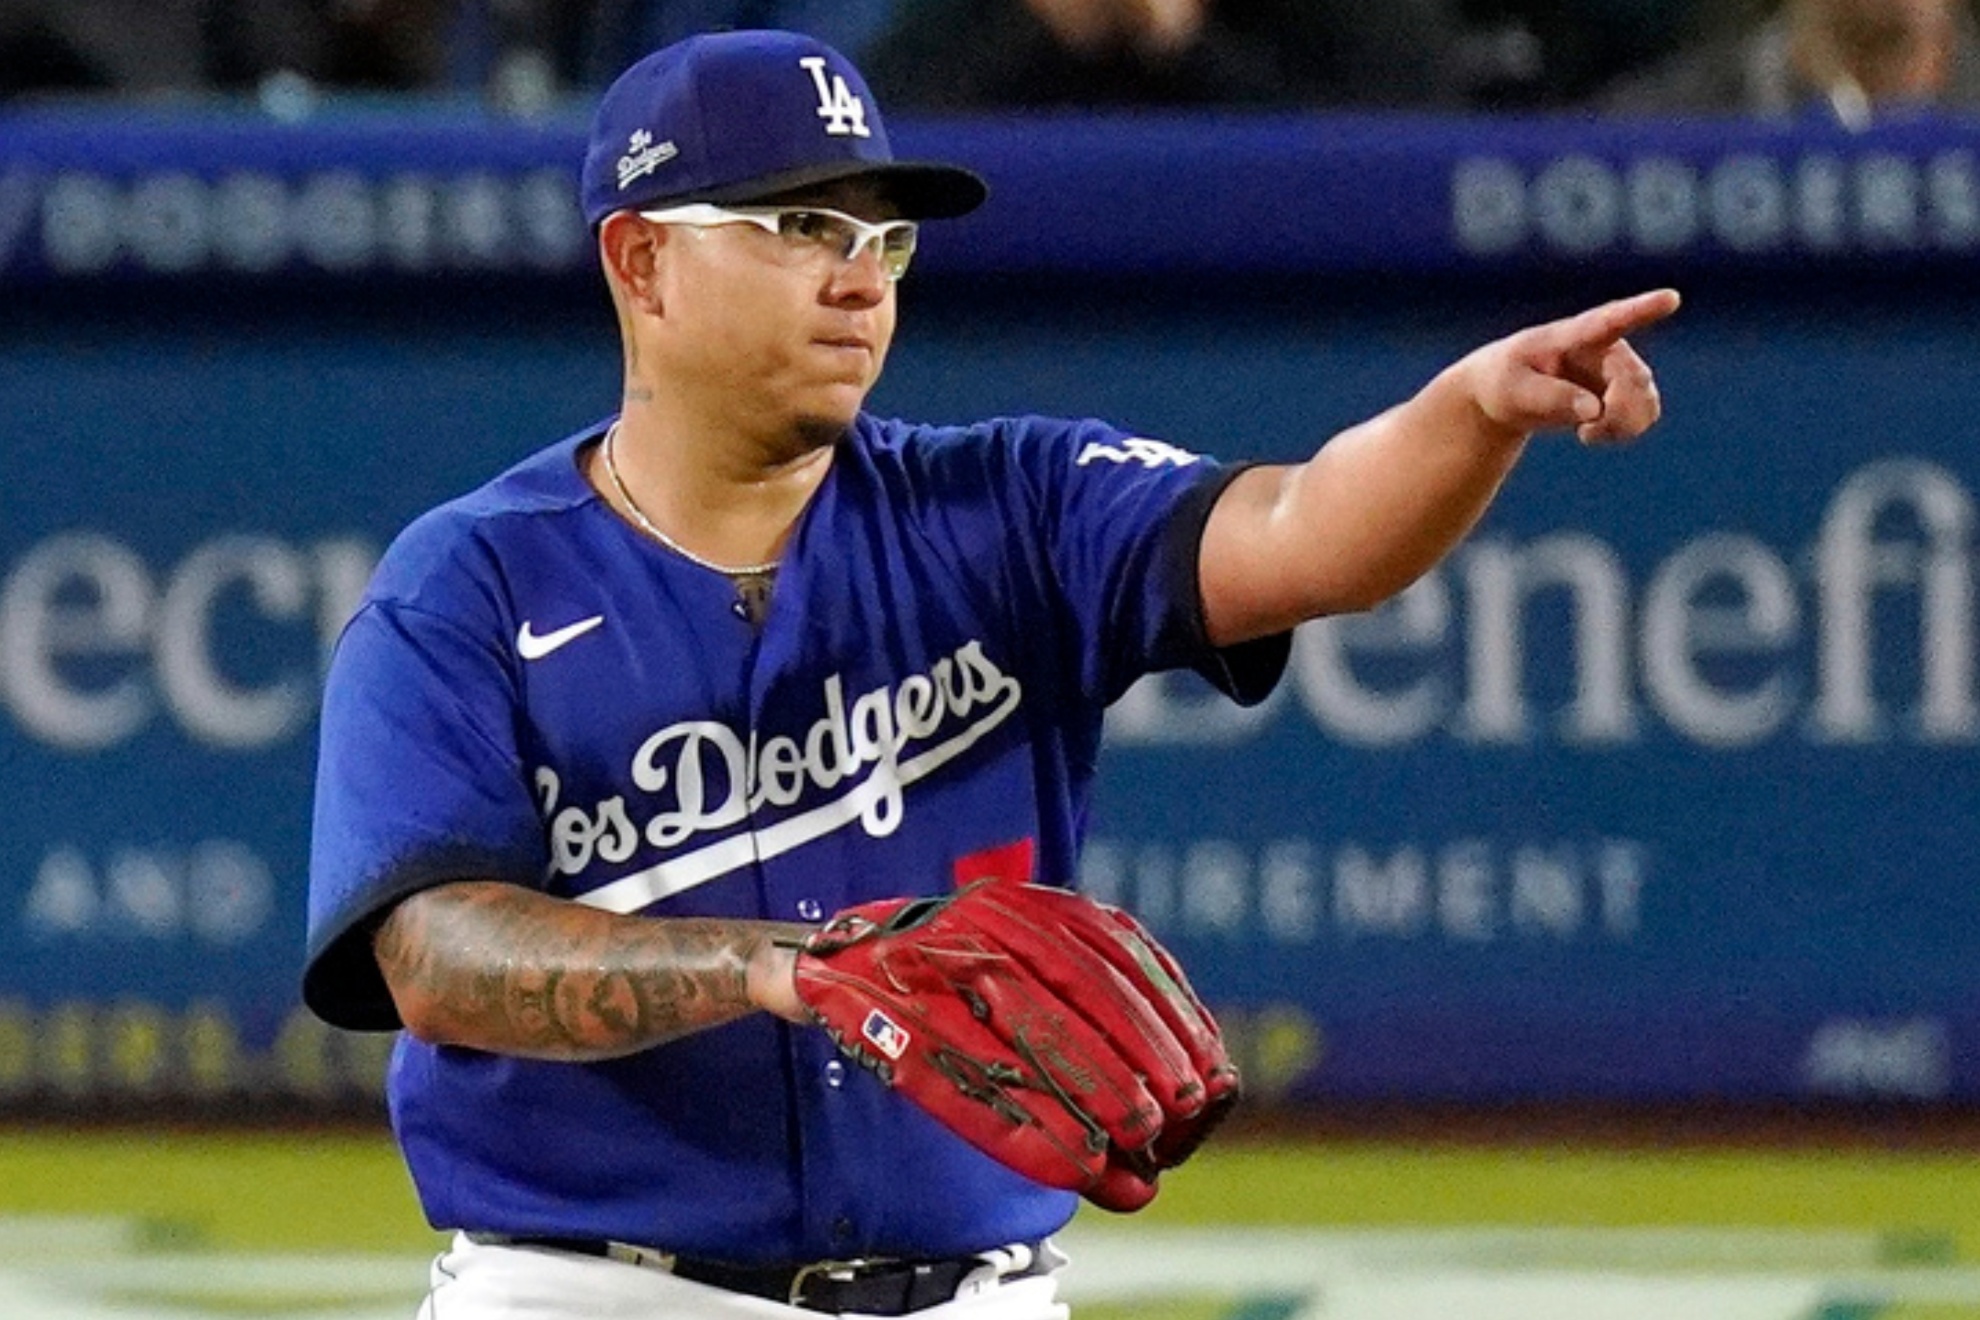 Julio Urias was arrested in September after a domestic abuse incident involving his wife